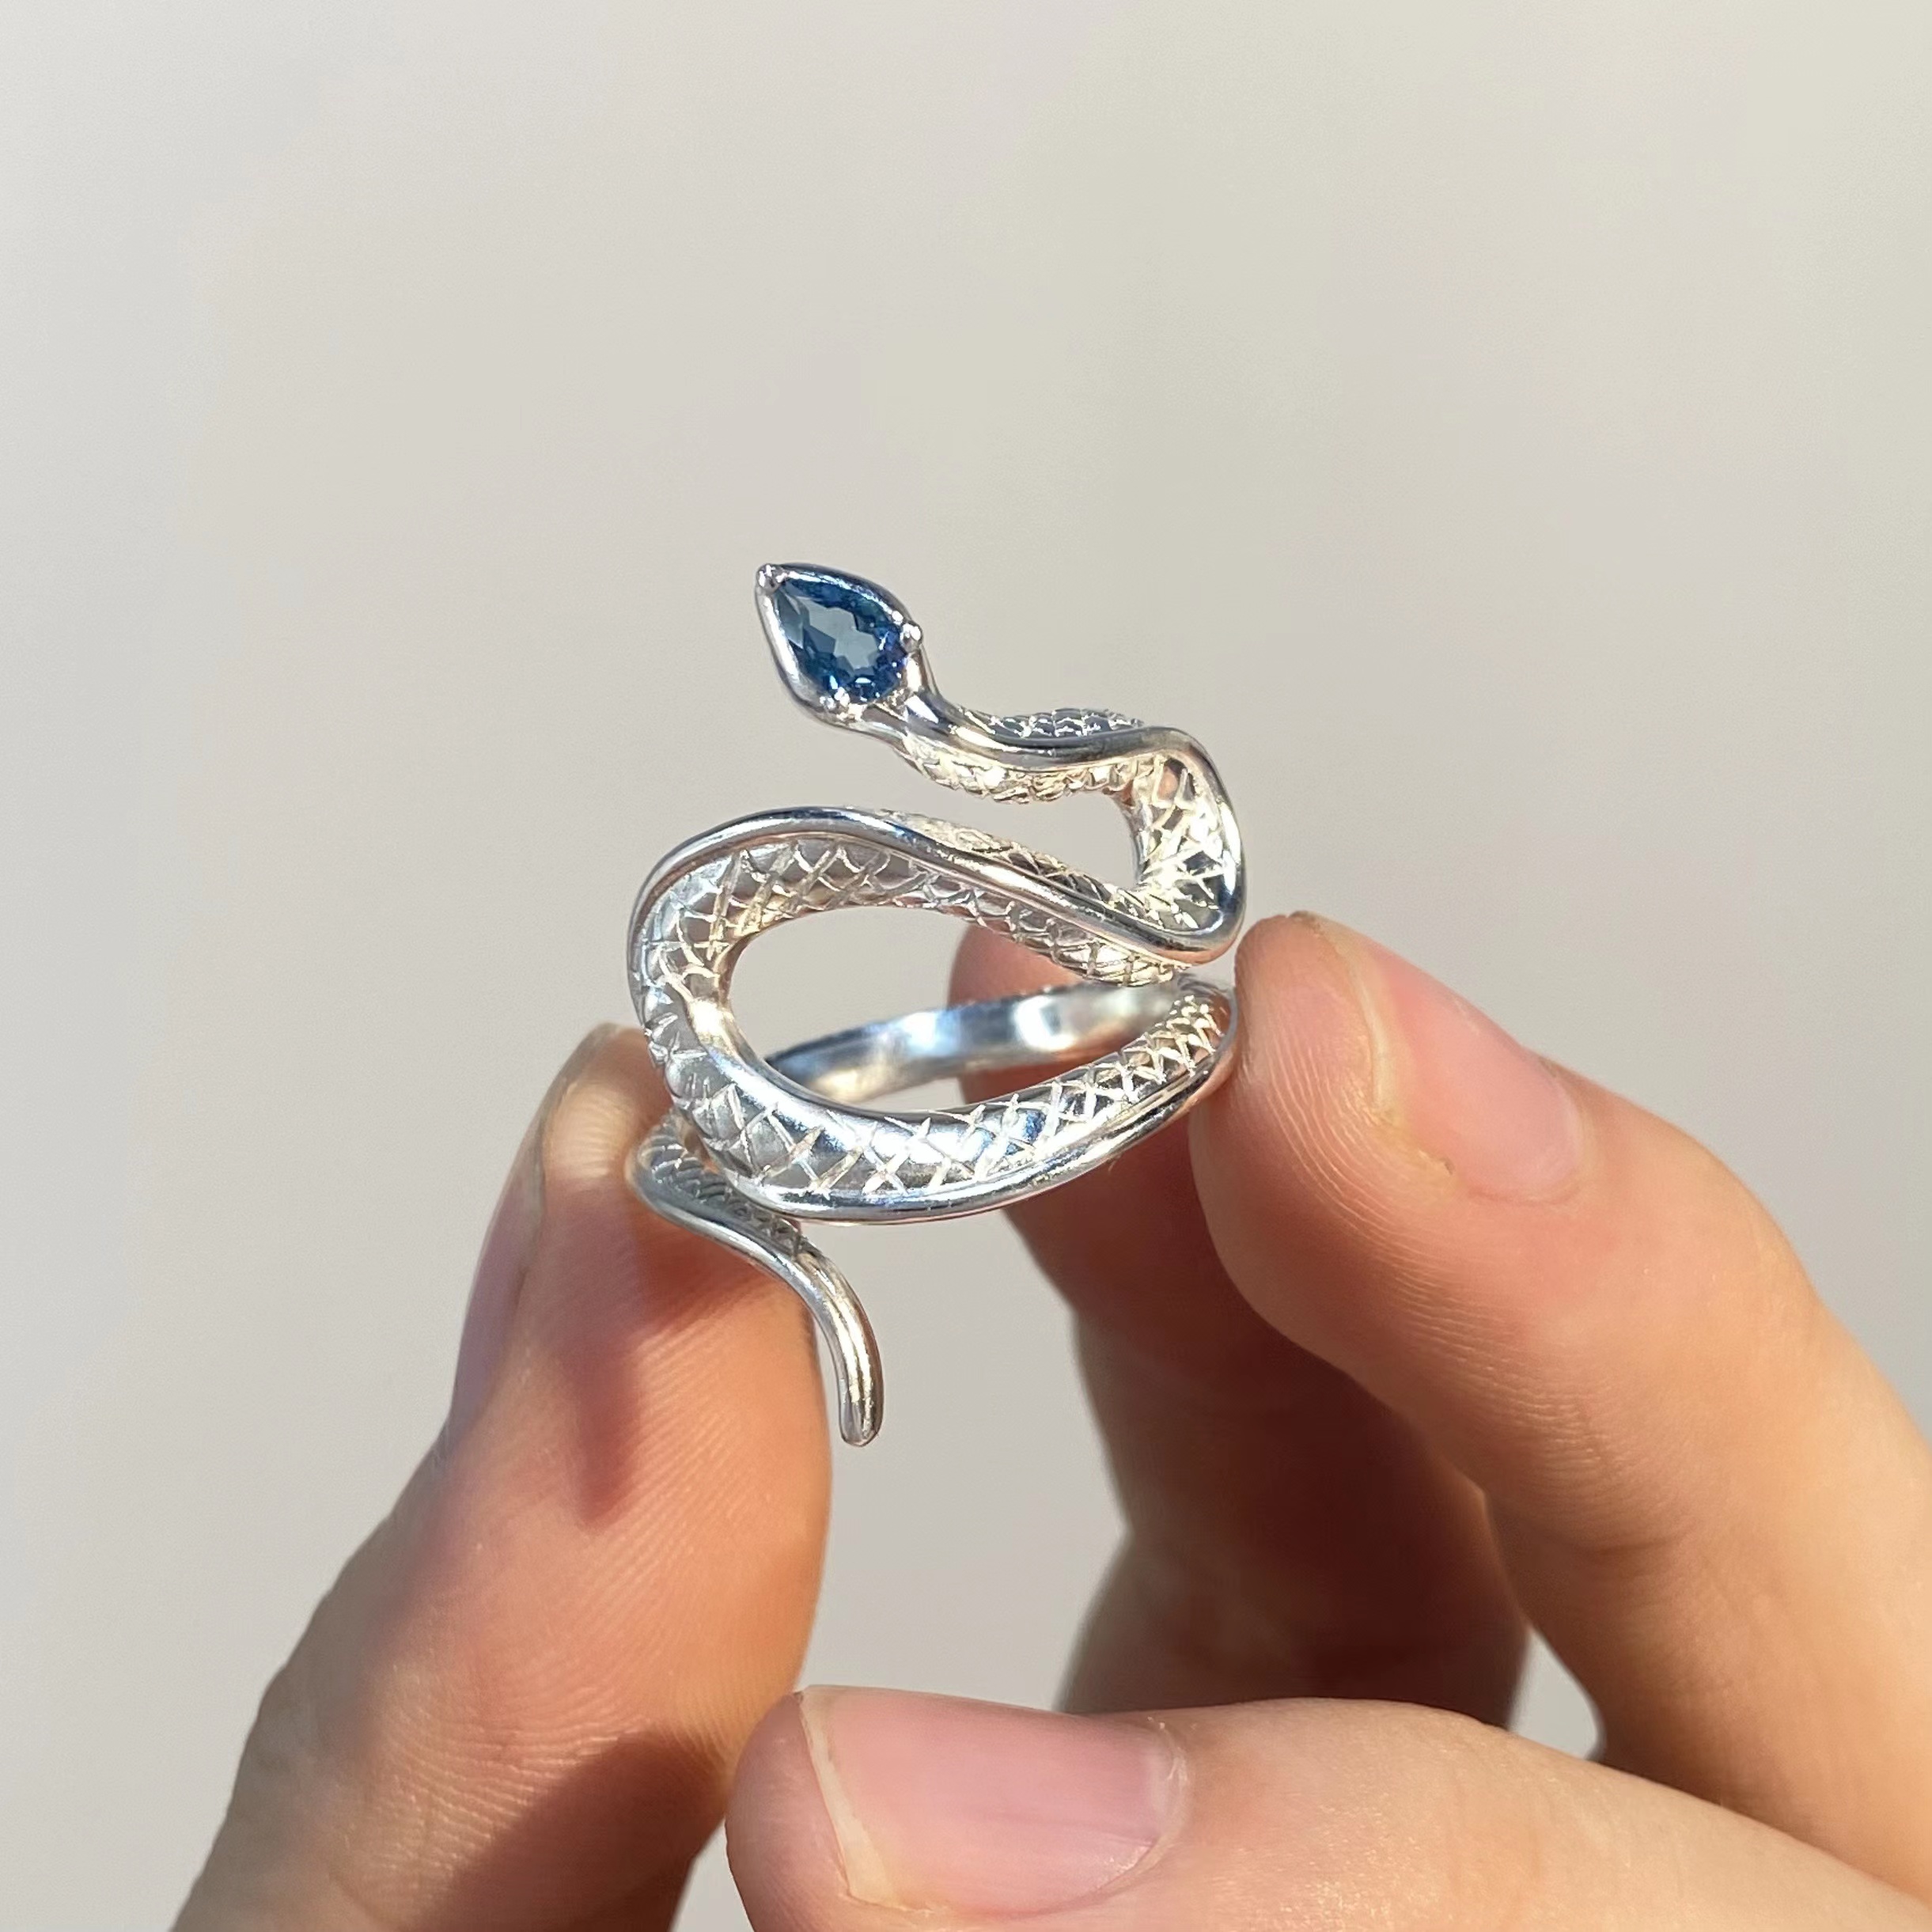 "Flexible snake" Inlaid Natural Topaz Handmade S925 Silver Ring